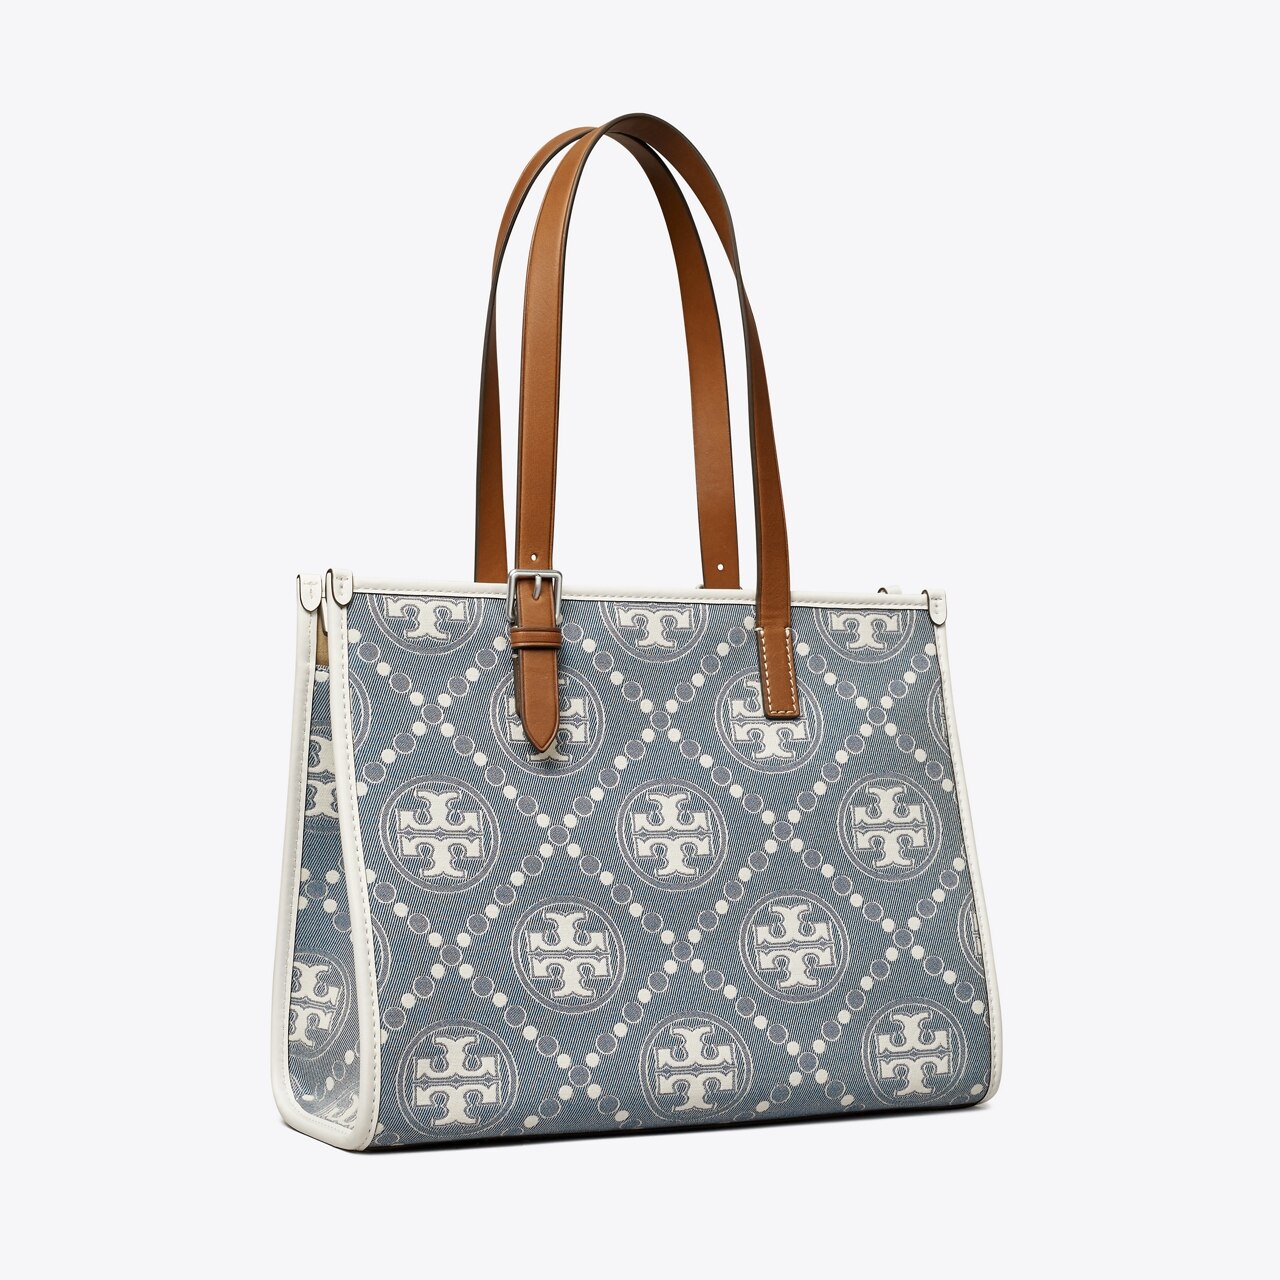 Tory Burch York Tote Unboxing! 